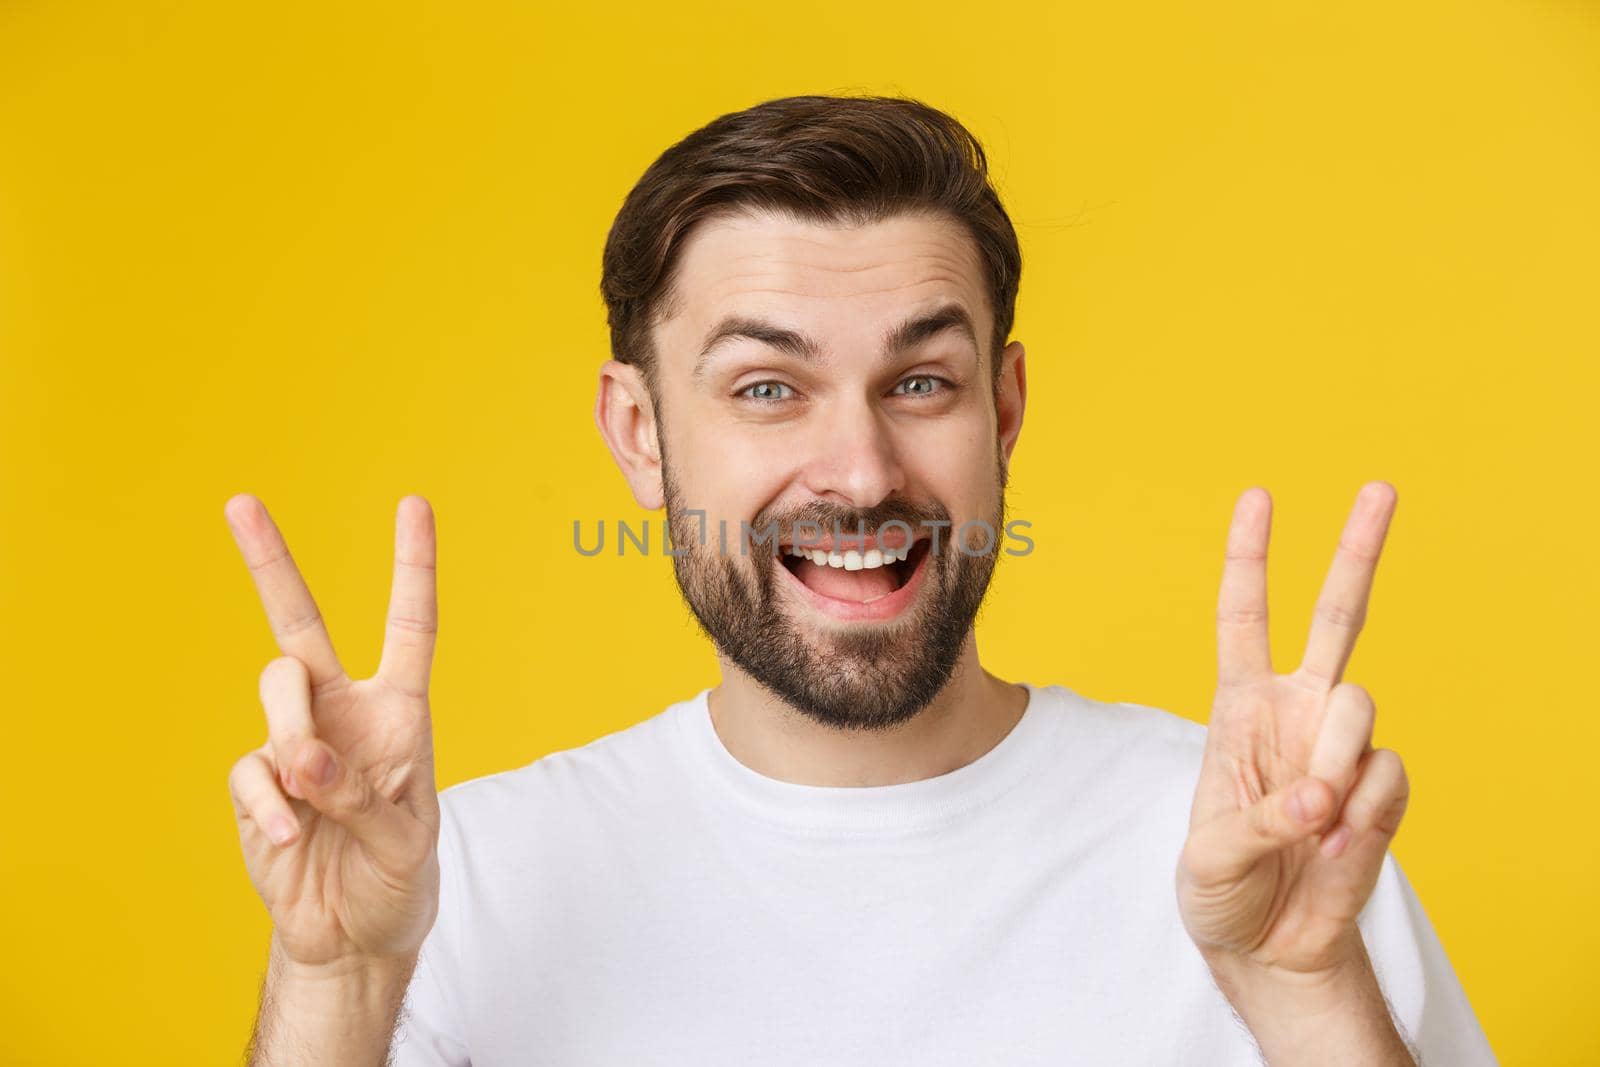 Young handsome man wearing striped t-shirt over isolated yellow background smiling looking to the camera showing fingers doing victory sign. Number two.